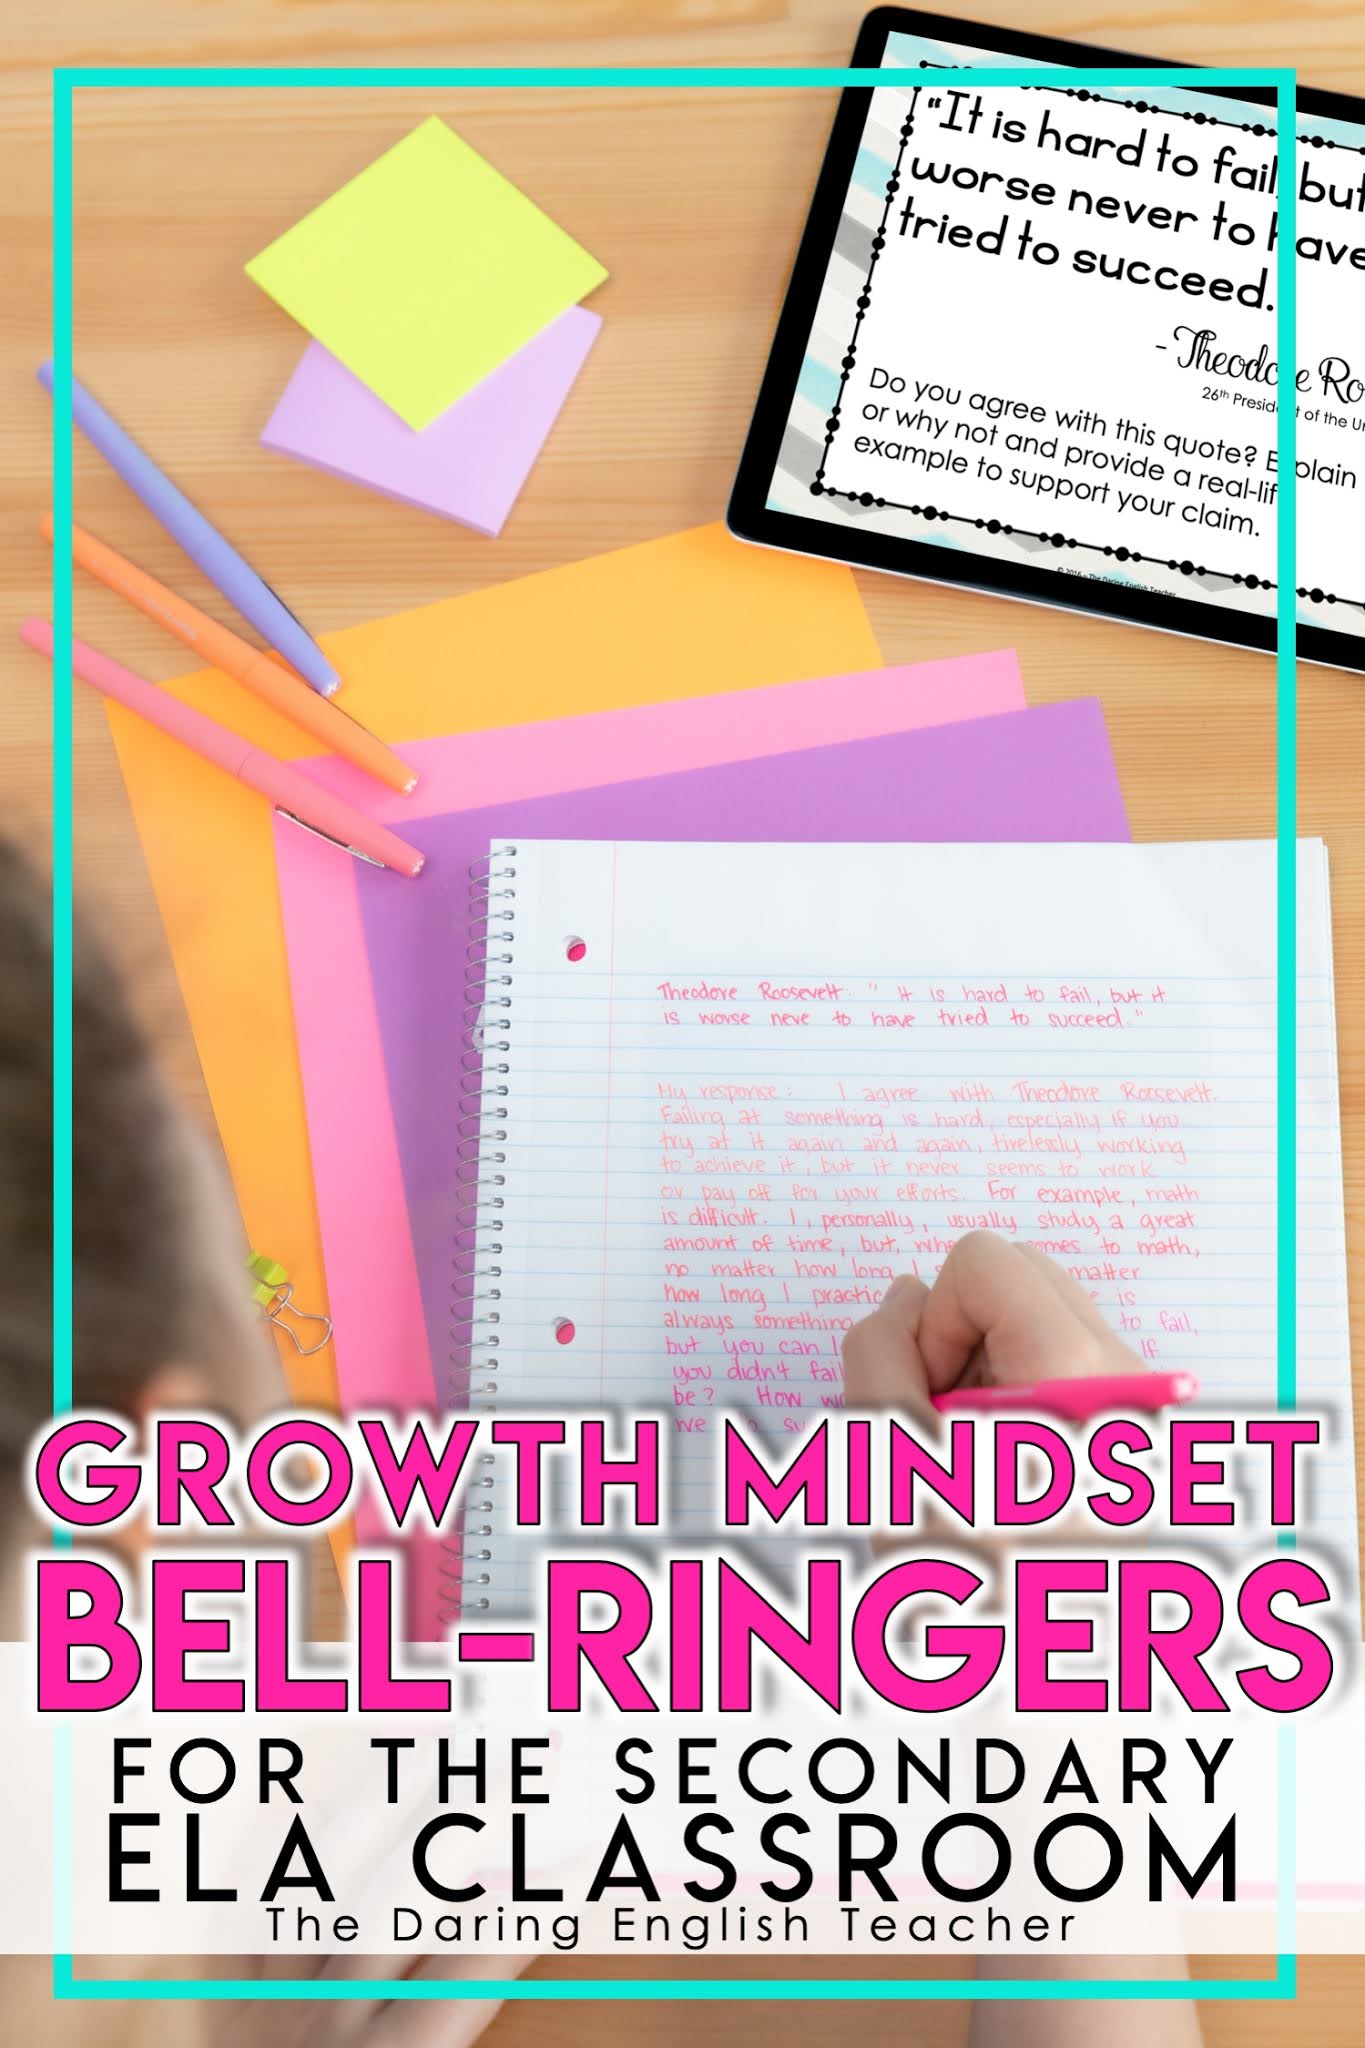 Growth Mindset Bell-Ringers